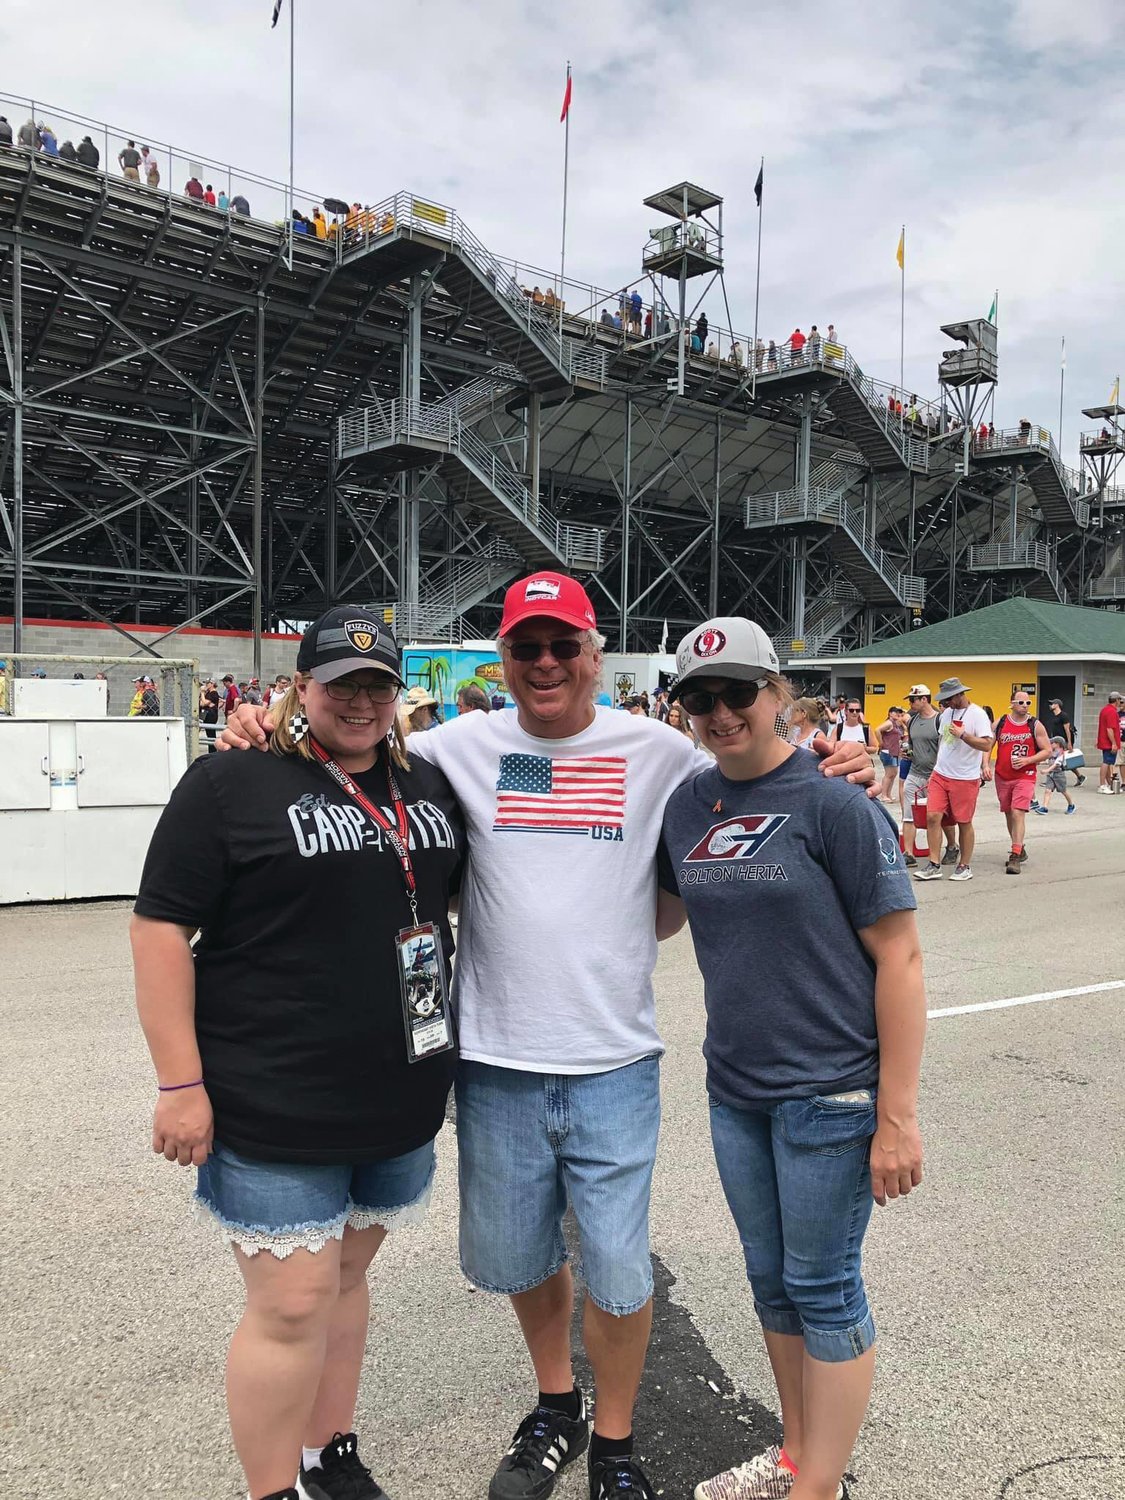 Chelsea Ebaugh, left, stands at the Indianapolis Motor Speedway with her father, Mike, and sister, Bailey. The longtime race fans will watch this year's Indianapolis 500 on television after the track was closed to fans.